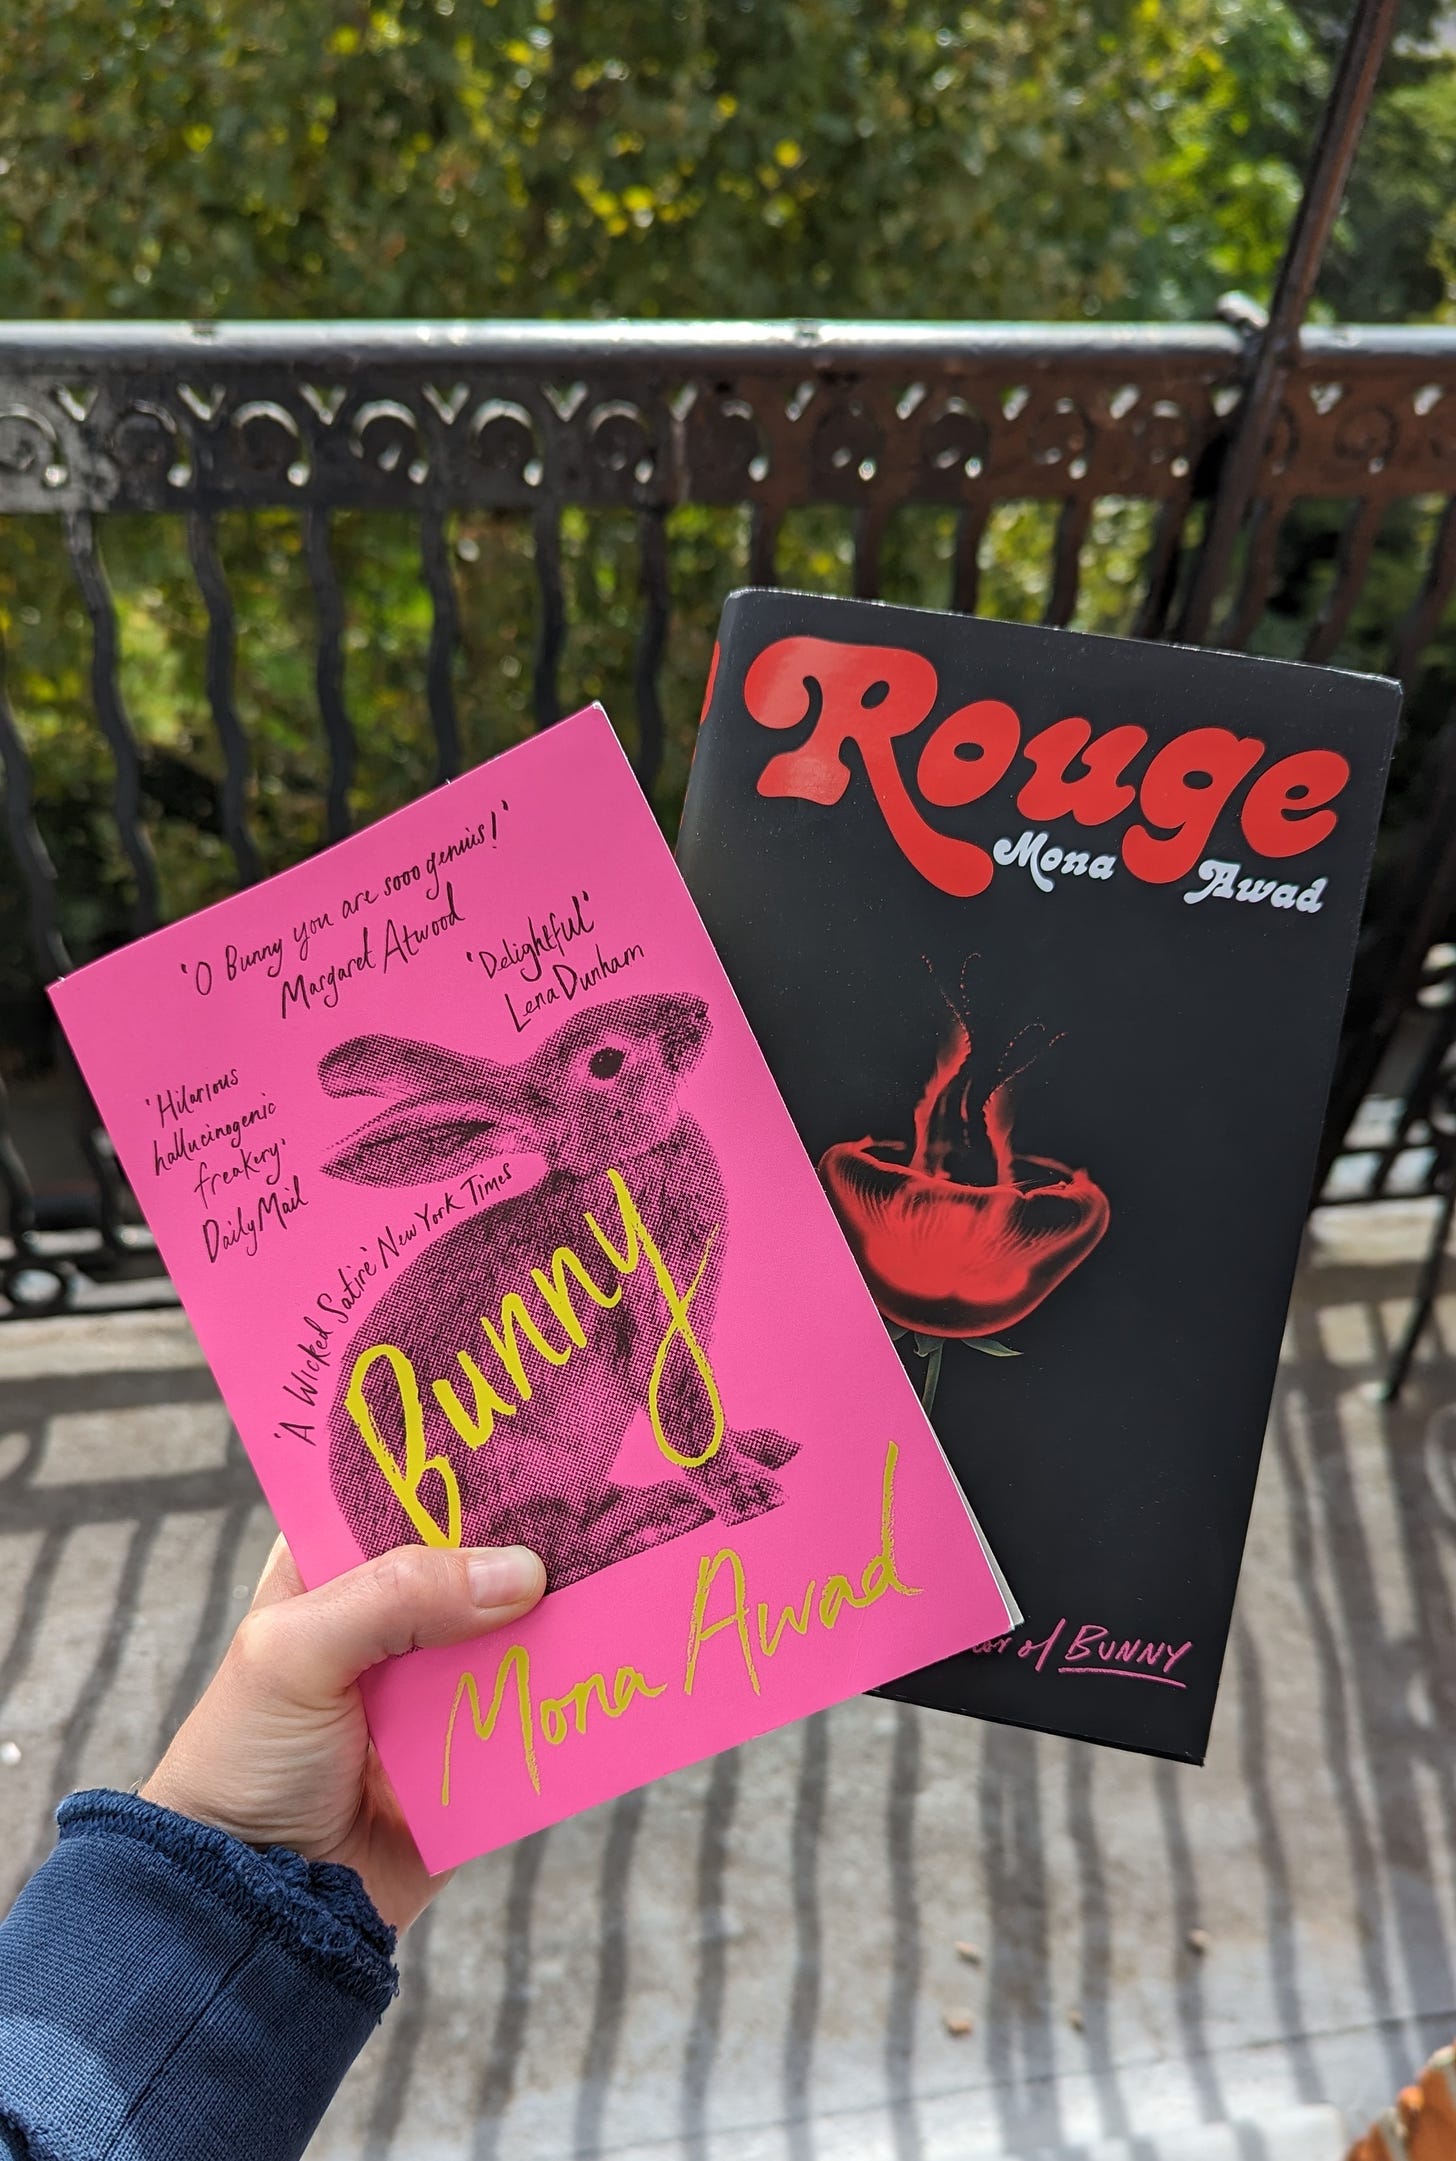 A picture of a pink book cover with a rabbit and a black book cover with a red rose representing Mona Awad's gothic novels, Bunny and Rouge.